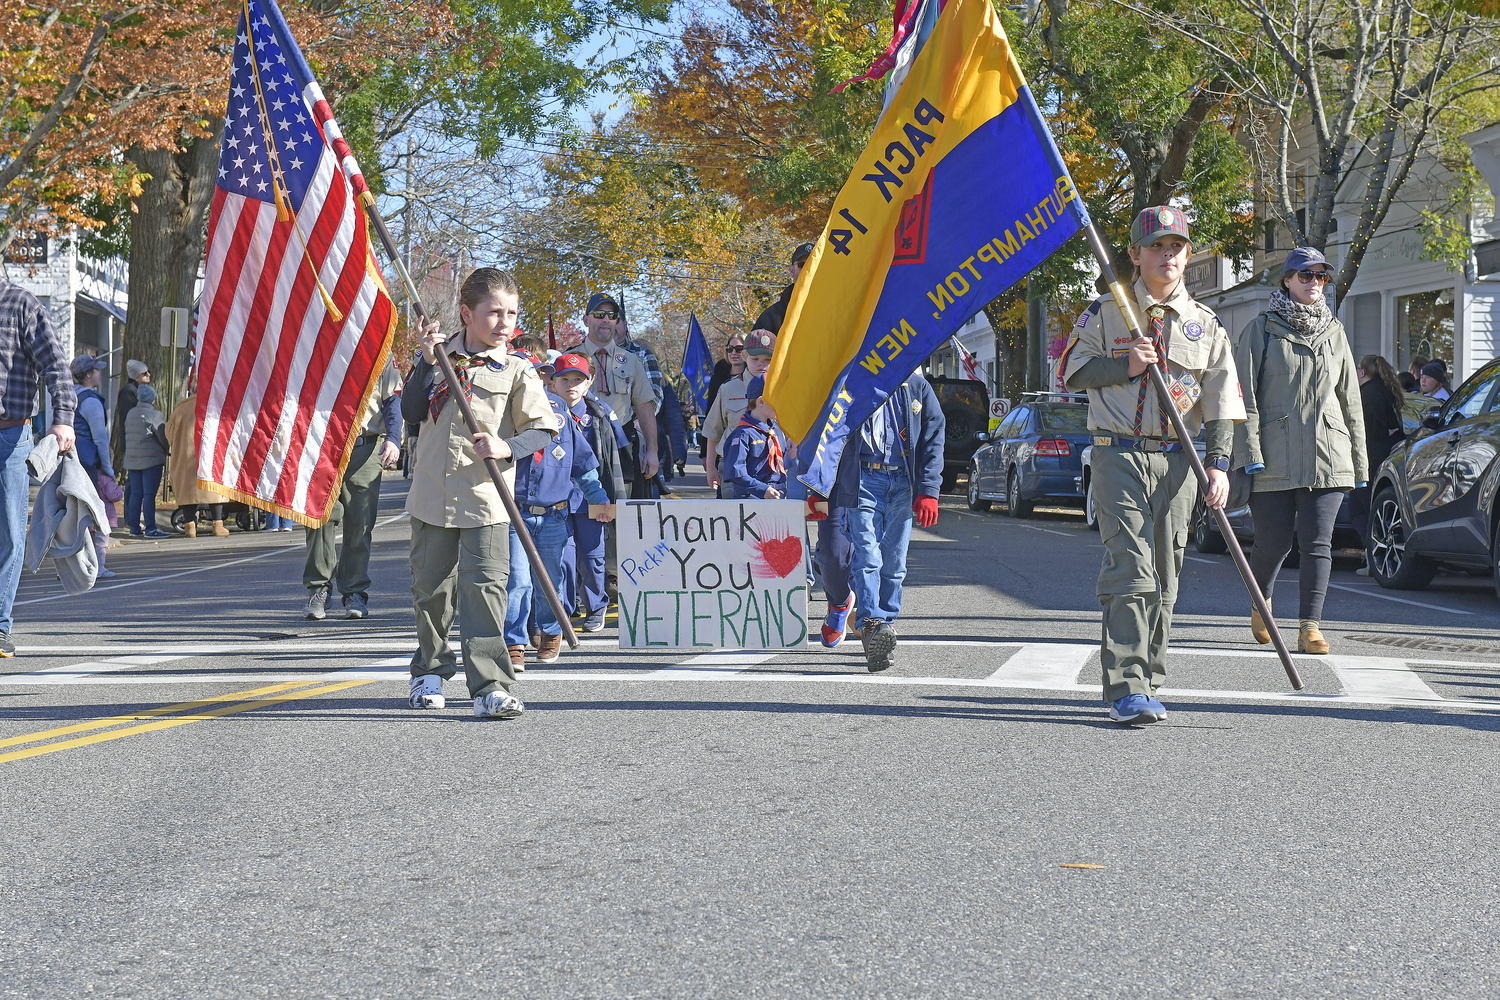 Southampton Cub Scout Pack 14 marches in the Veterans Day parade on Saturday.